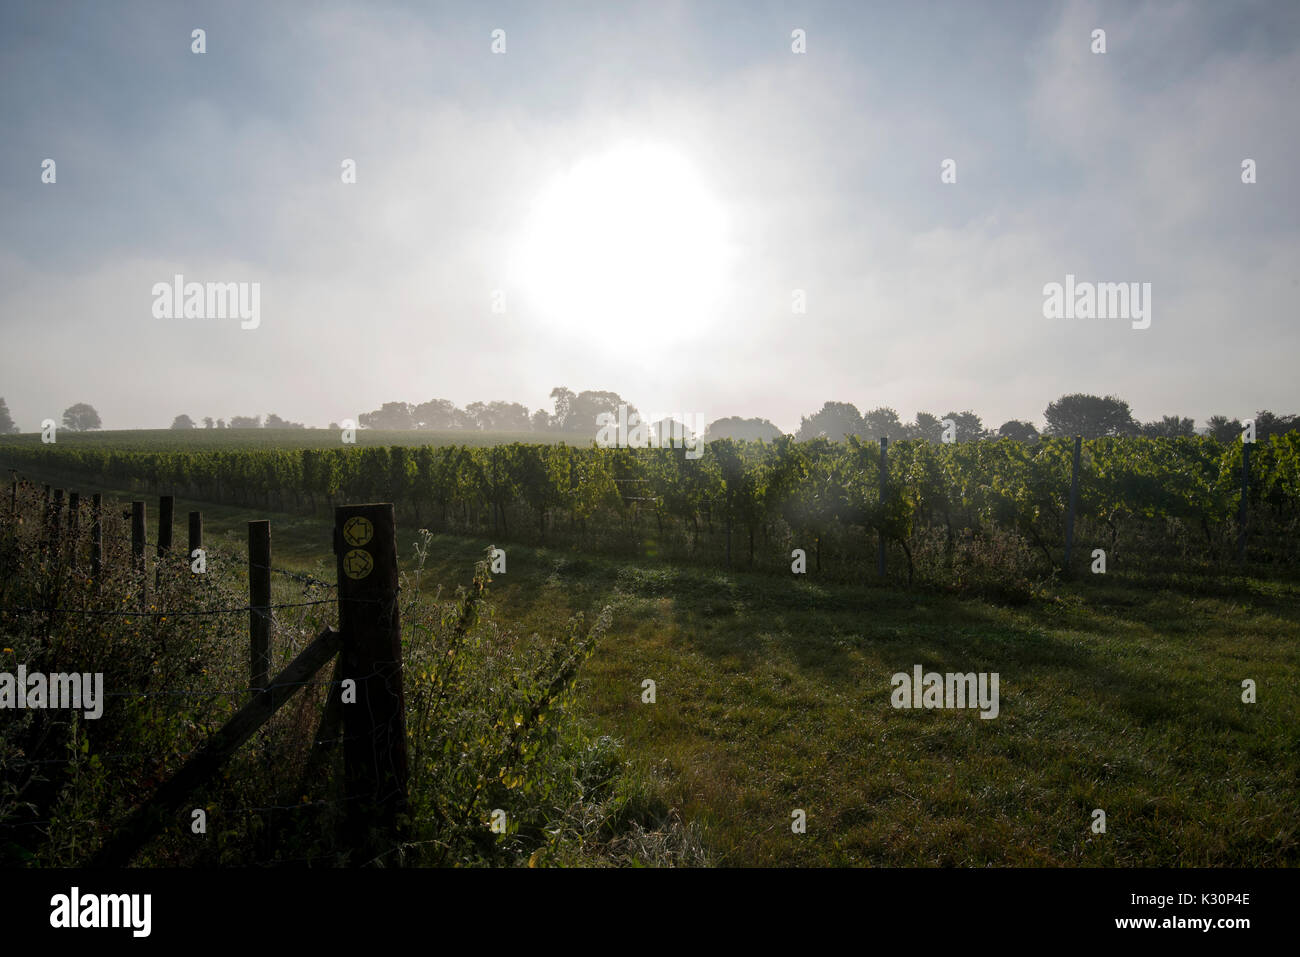 English vine yard, rows of grape vines in early morning mist and low sun, late August as the grapes ripen. Kent, UK Stock Photo